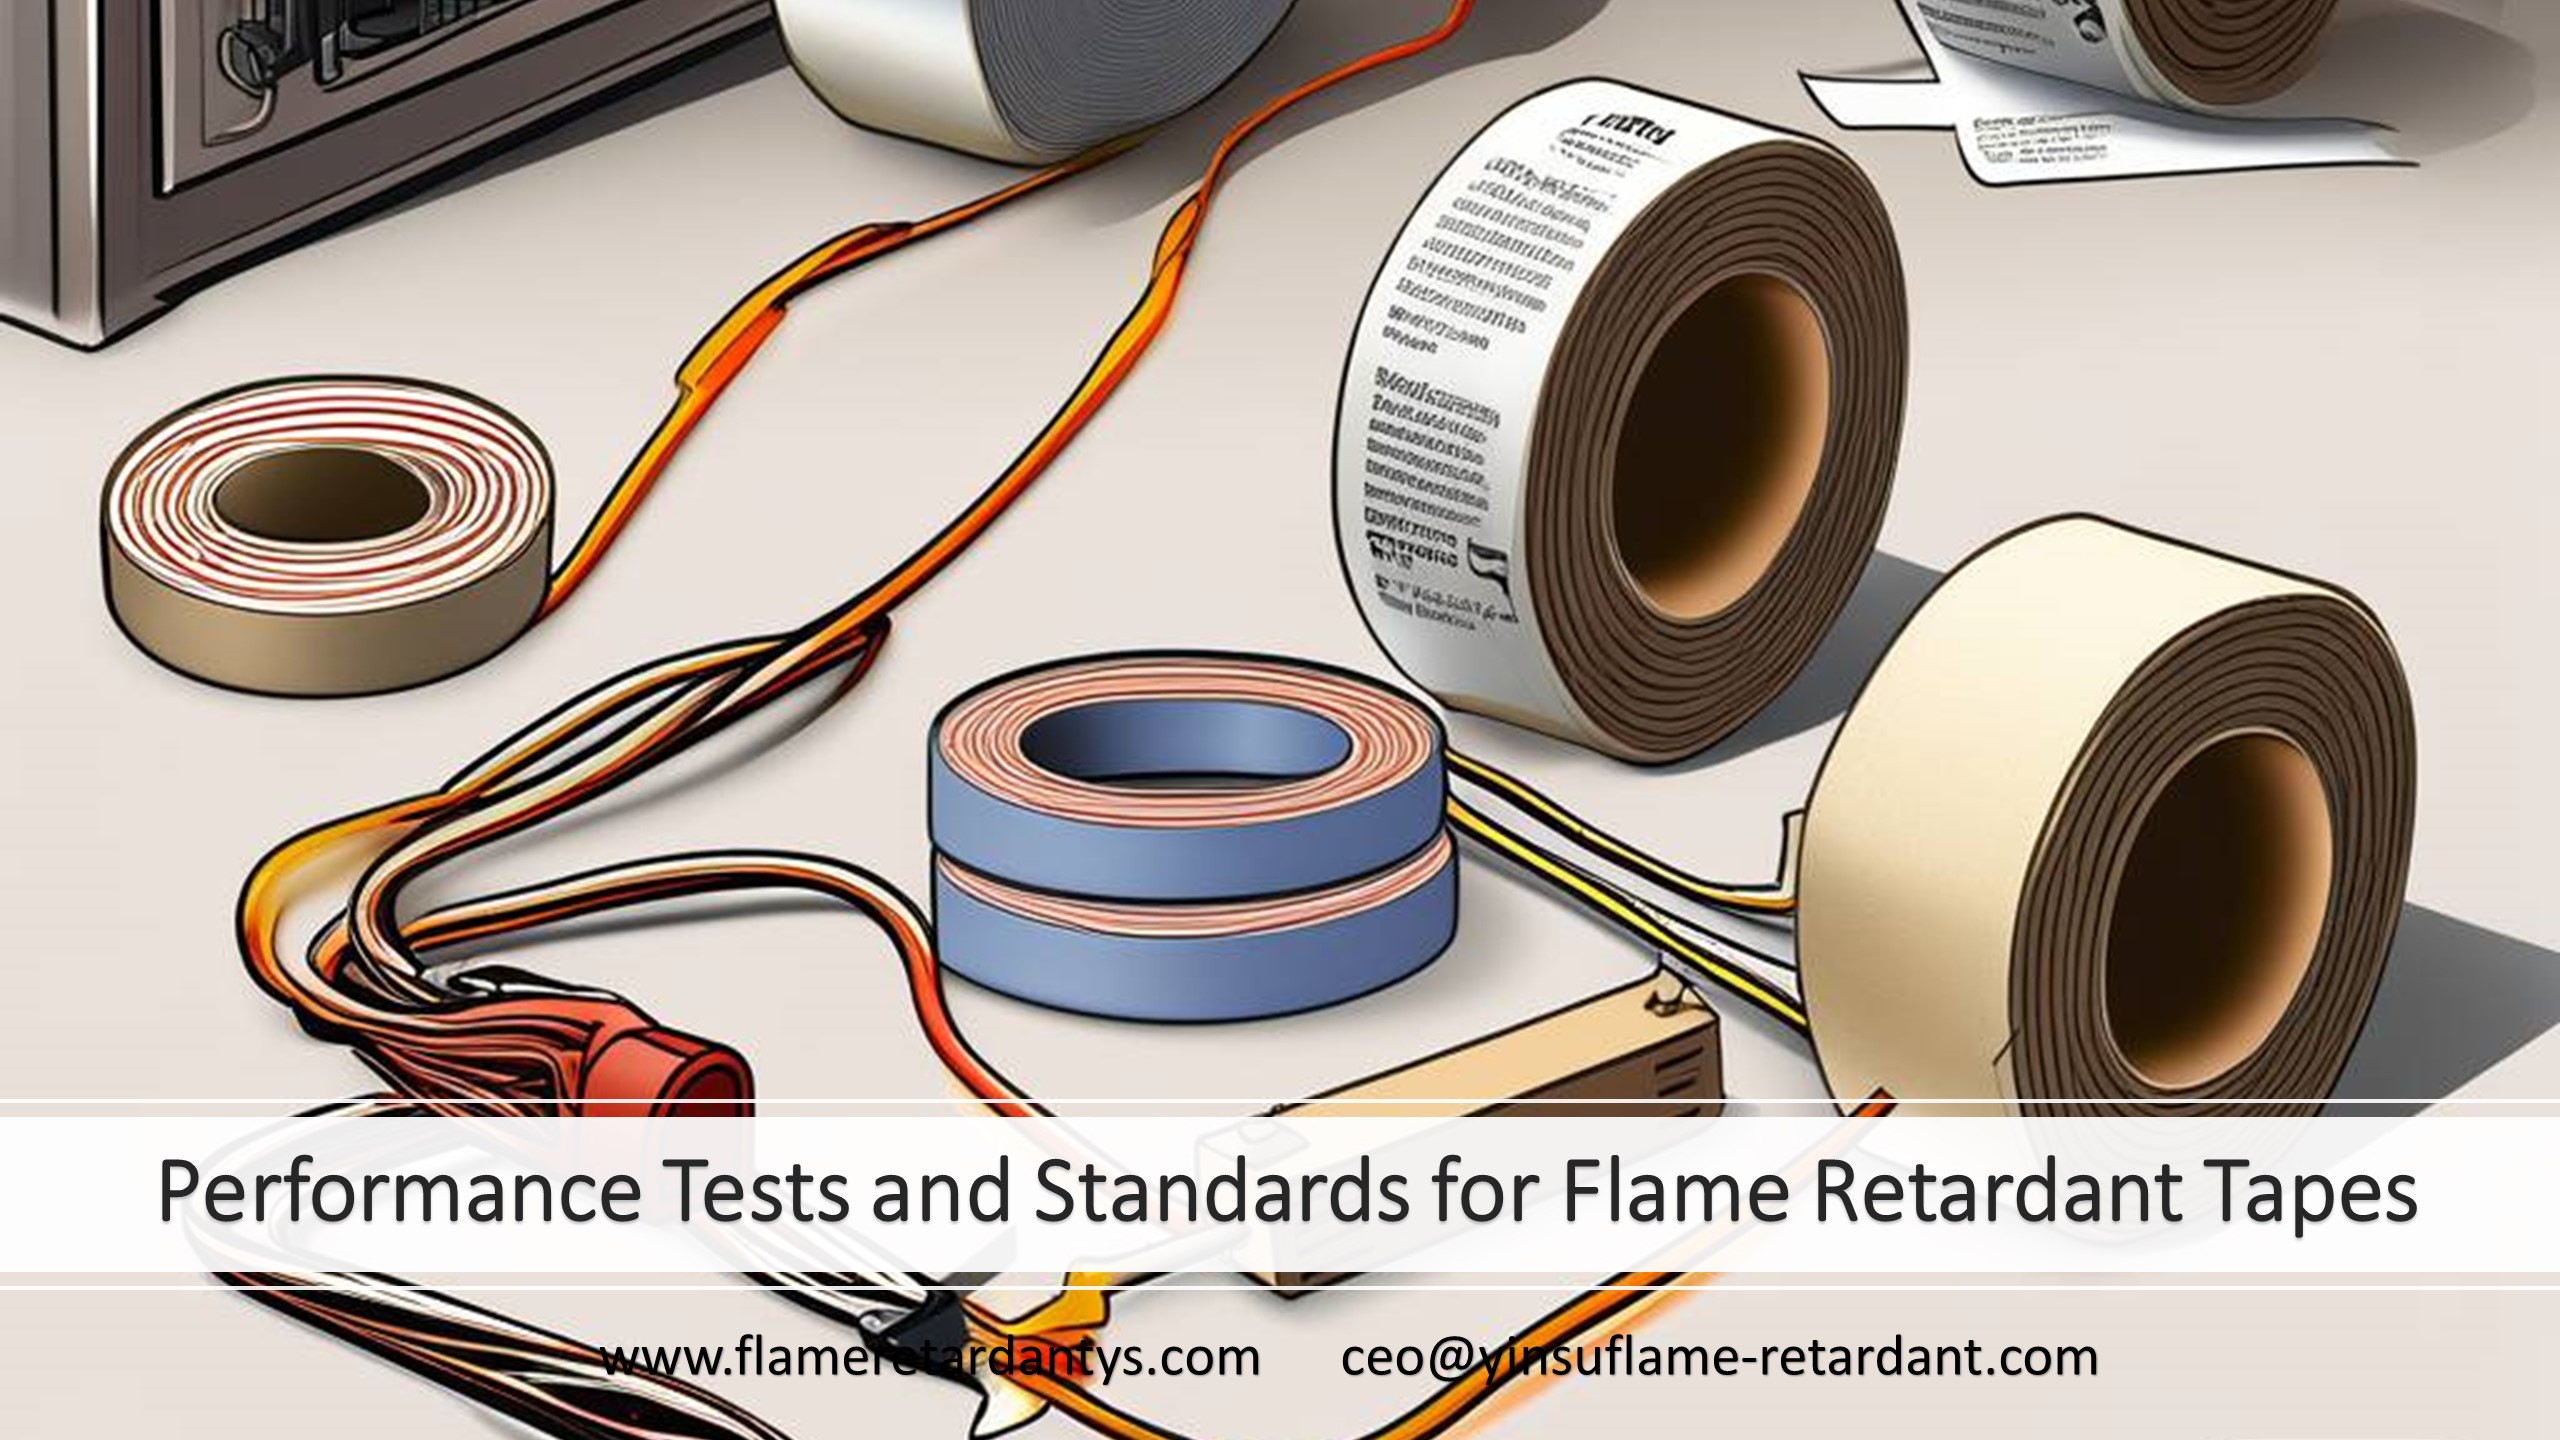 Performance Tests and Standards for Flame Retardant Tapes